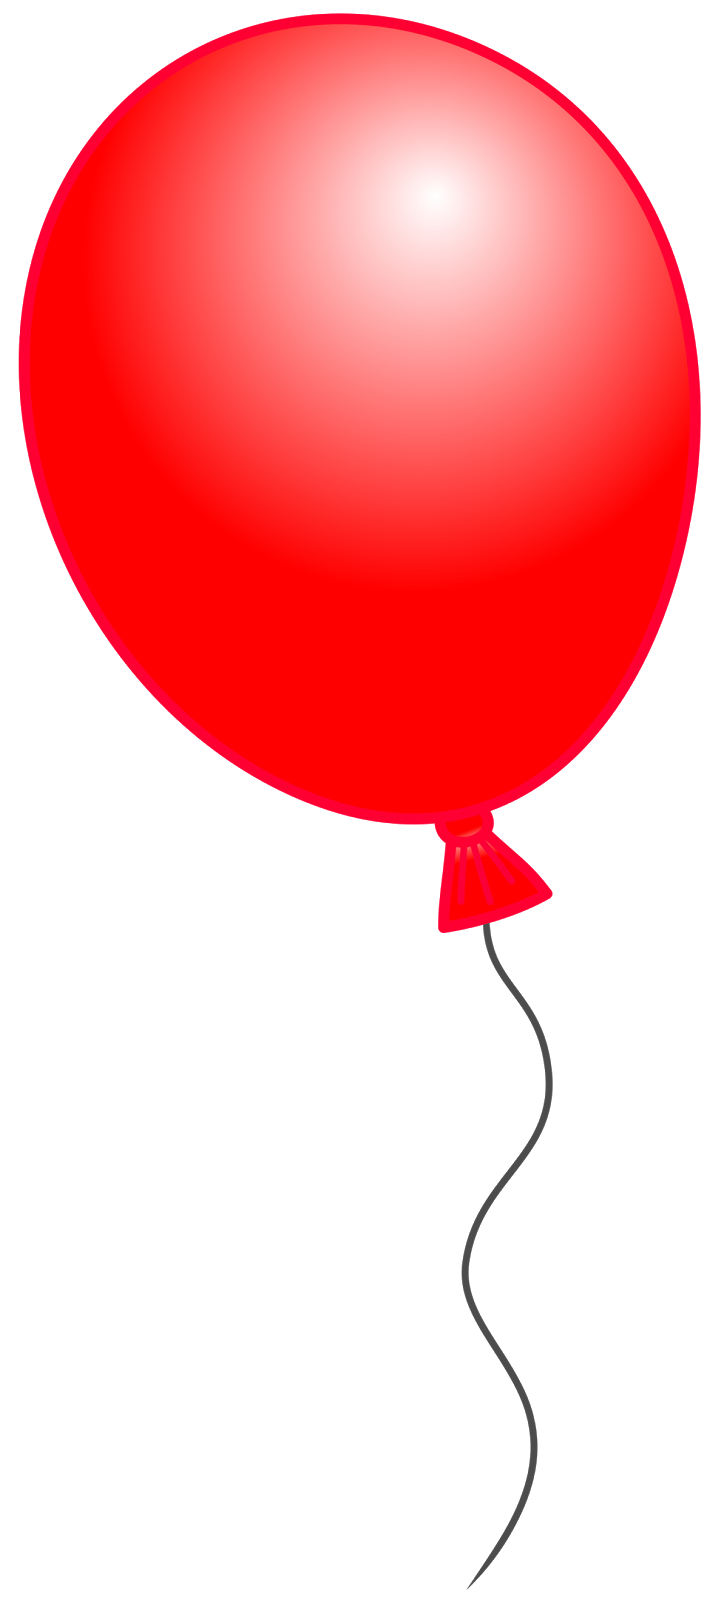 Small Red Balloon drawing free image download